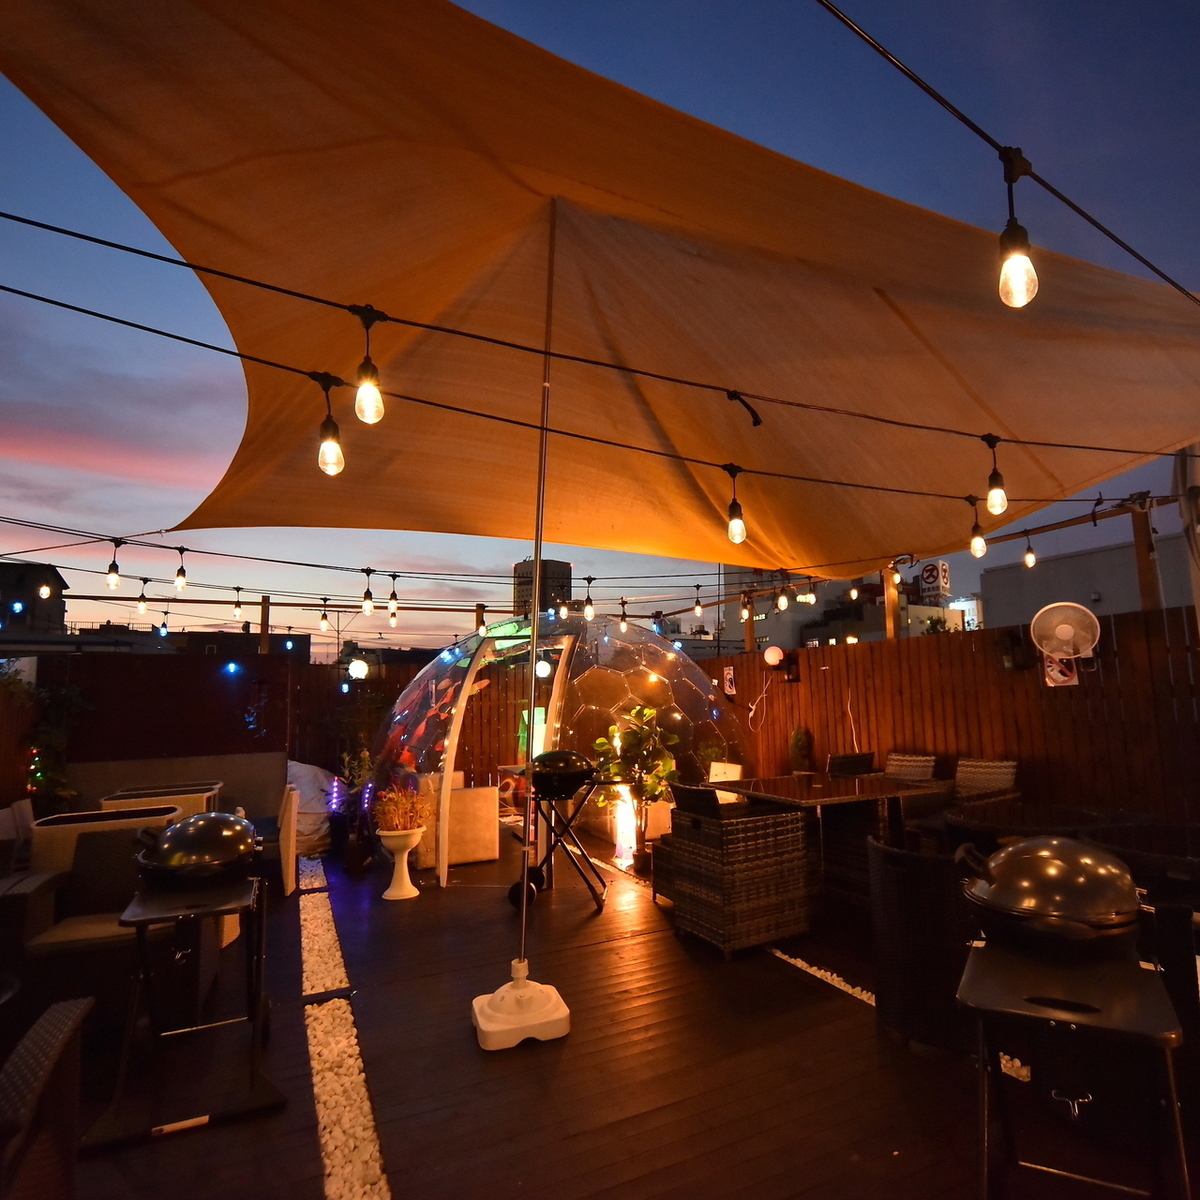 A BBQ beer garden full of openness! Enjoy while looking at the sky and night view♪